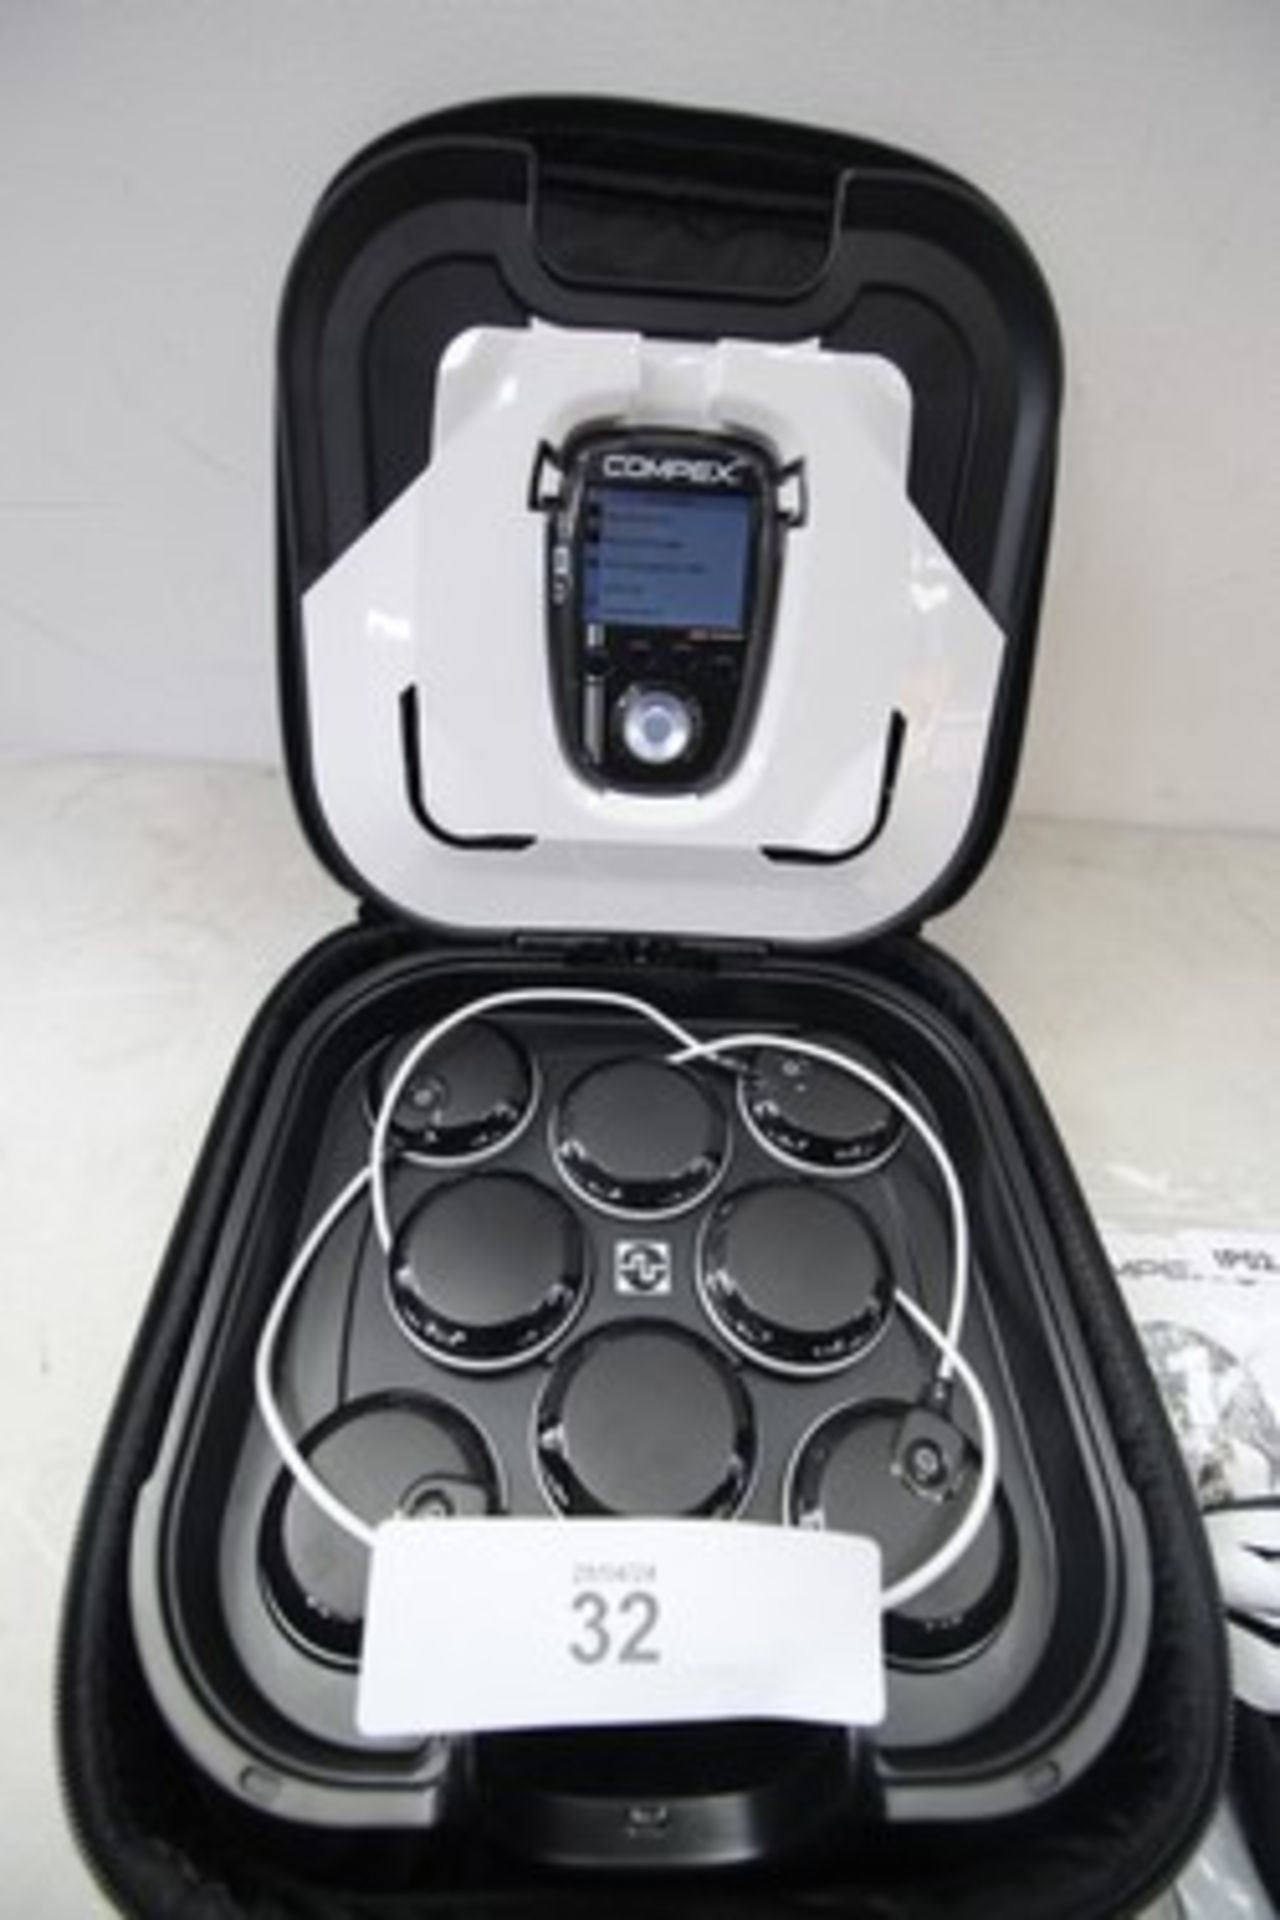 1 x Compex SP 8.0 wireless muscle stimulator, powers on ok, not tested, in carry case - spares ( - Image 2 of 4